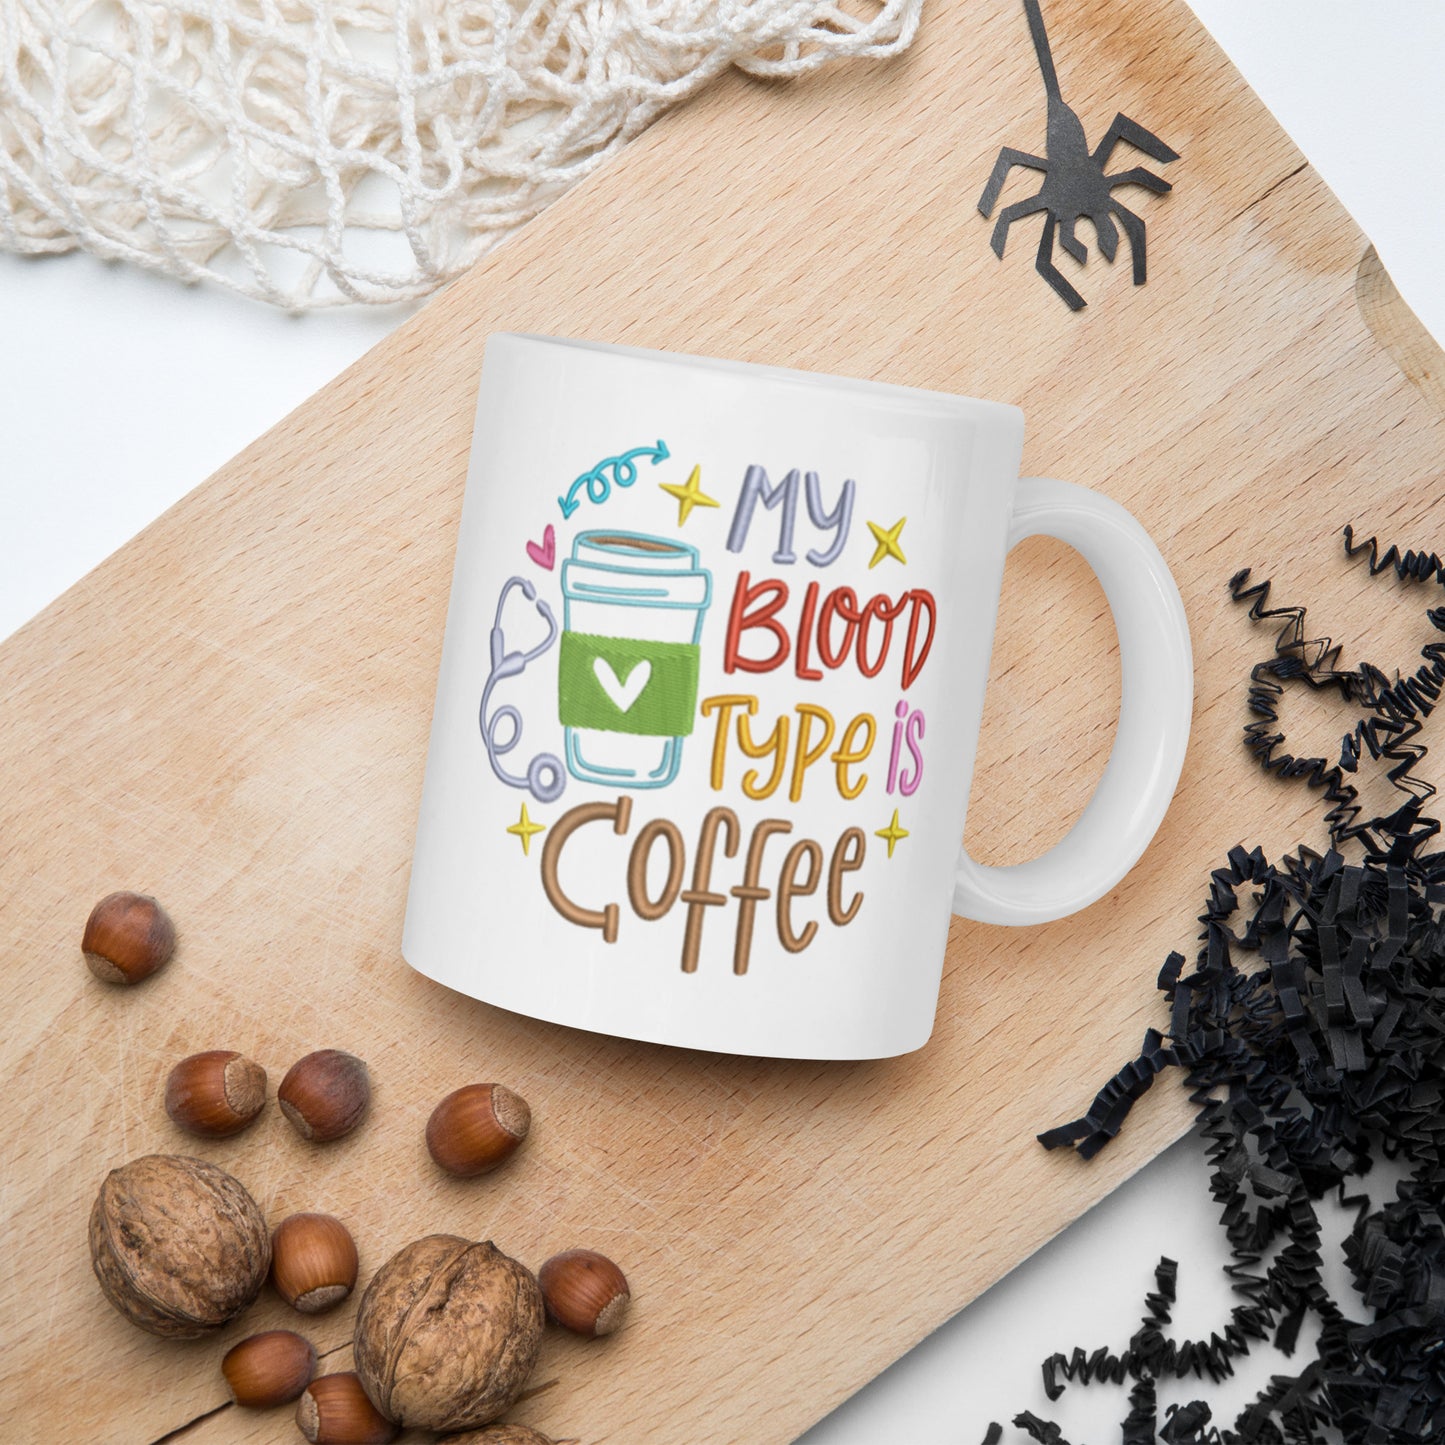 My Blood Type is coffee